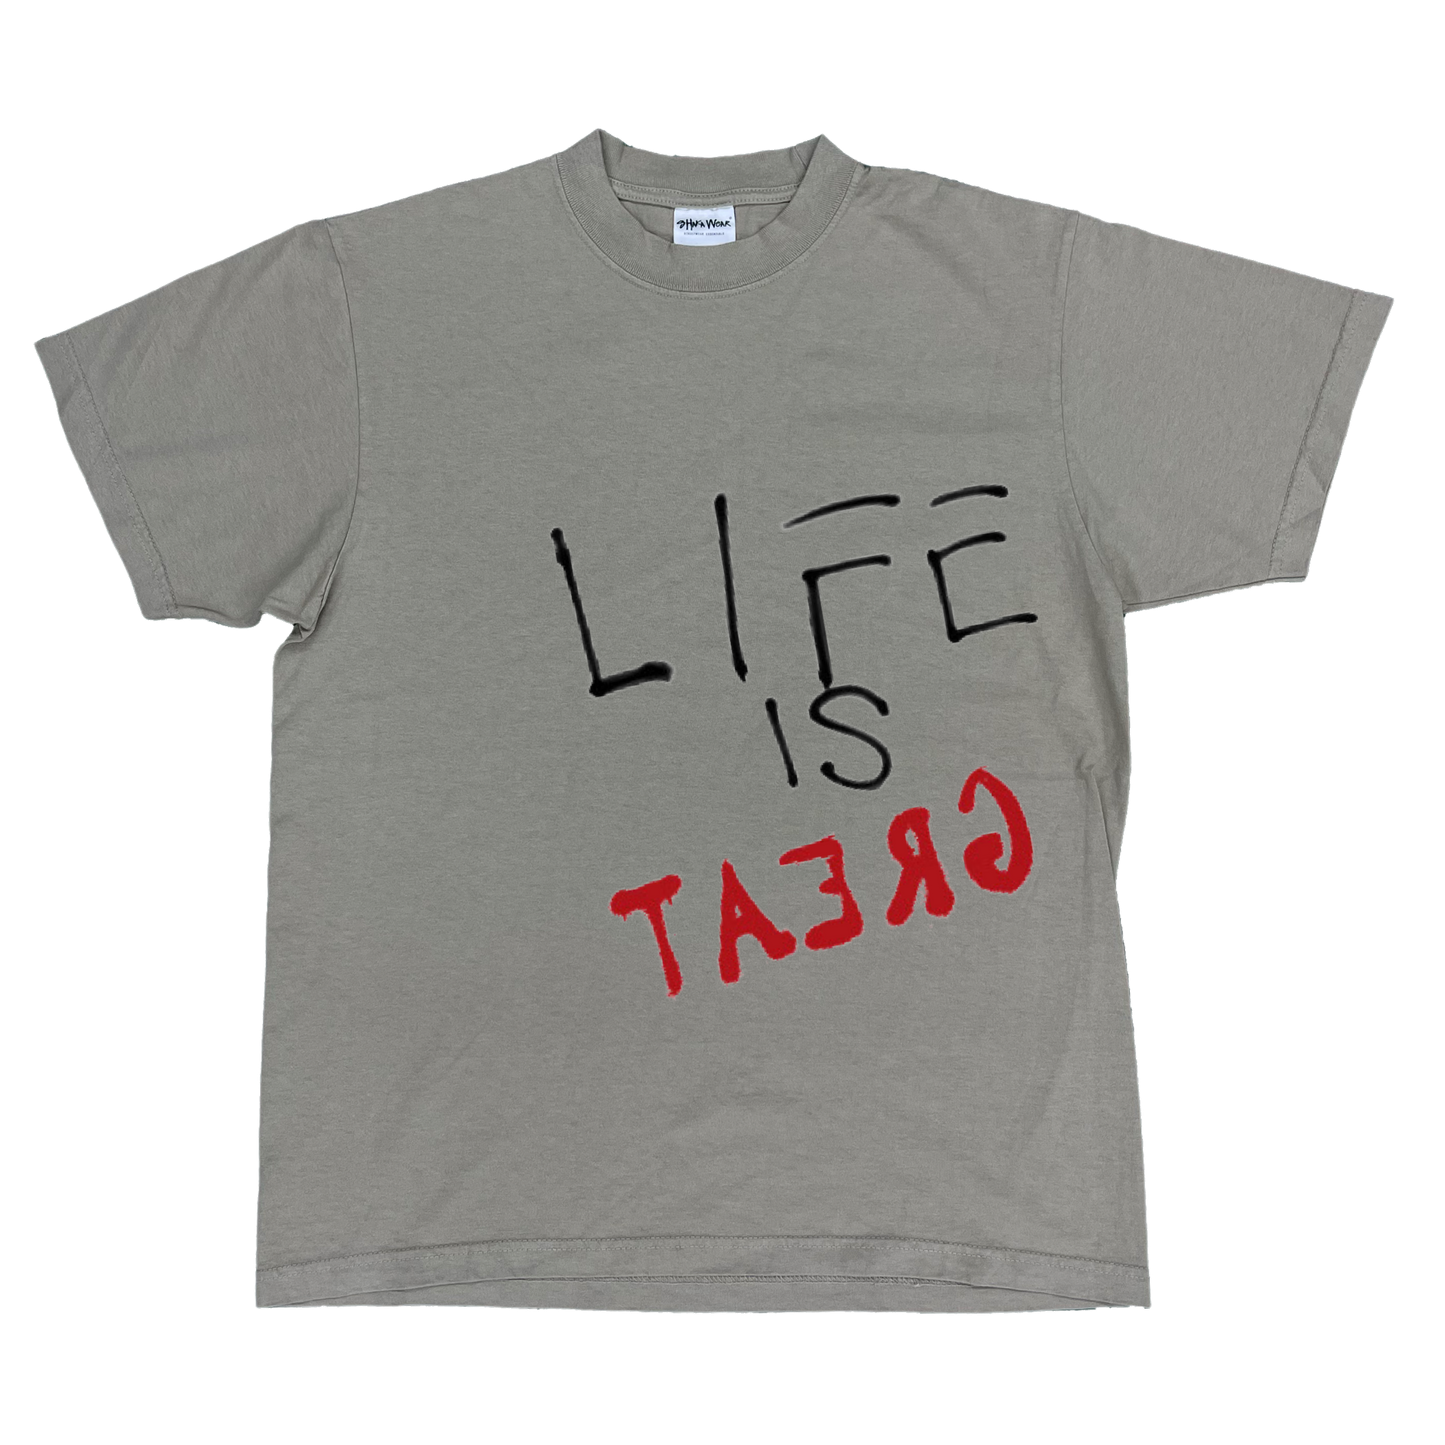 Gr8ness Life Is Great T-Shirt Tan